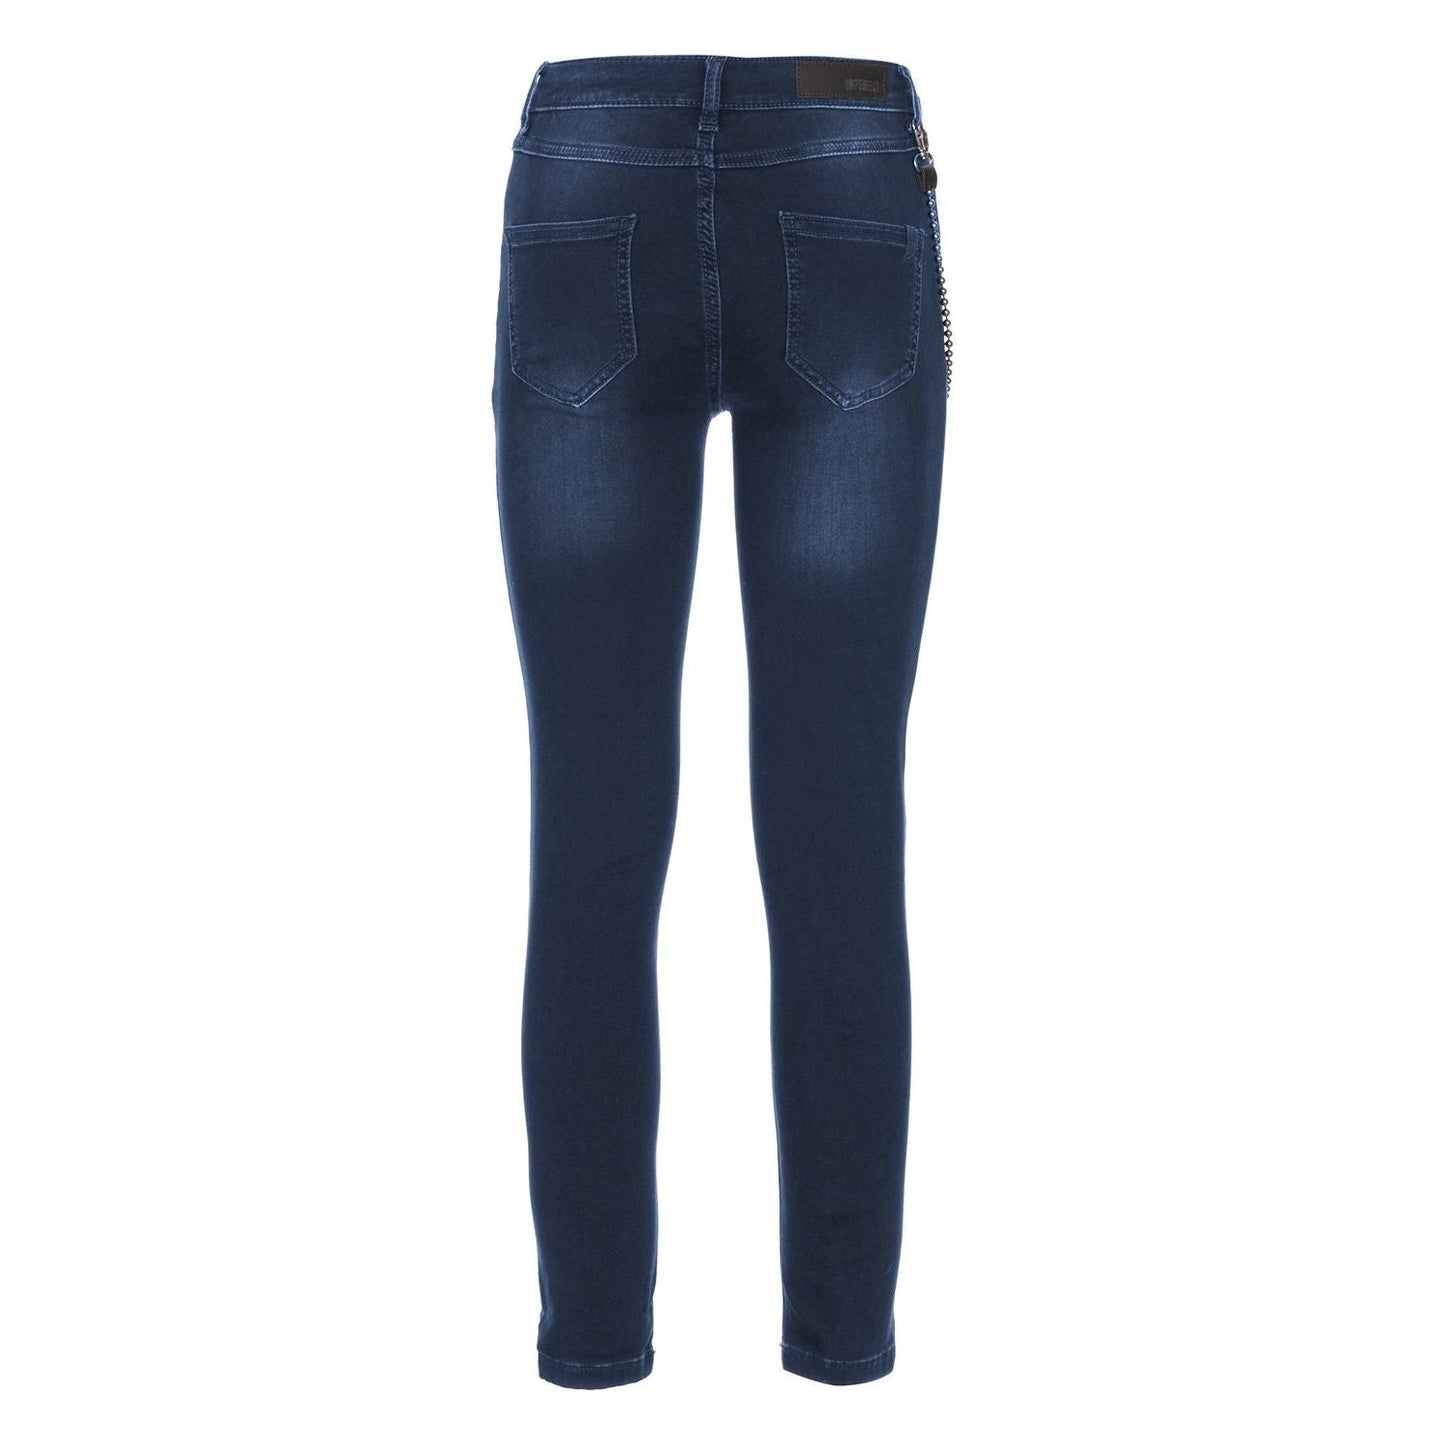 Imperfect Chic Lightly Washed Blue Slim-Fit Jeans with Chain Detail blue-cotton-jeans-pants-1